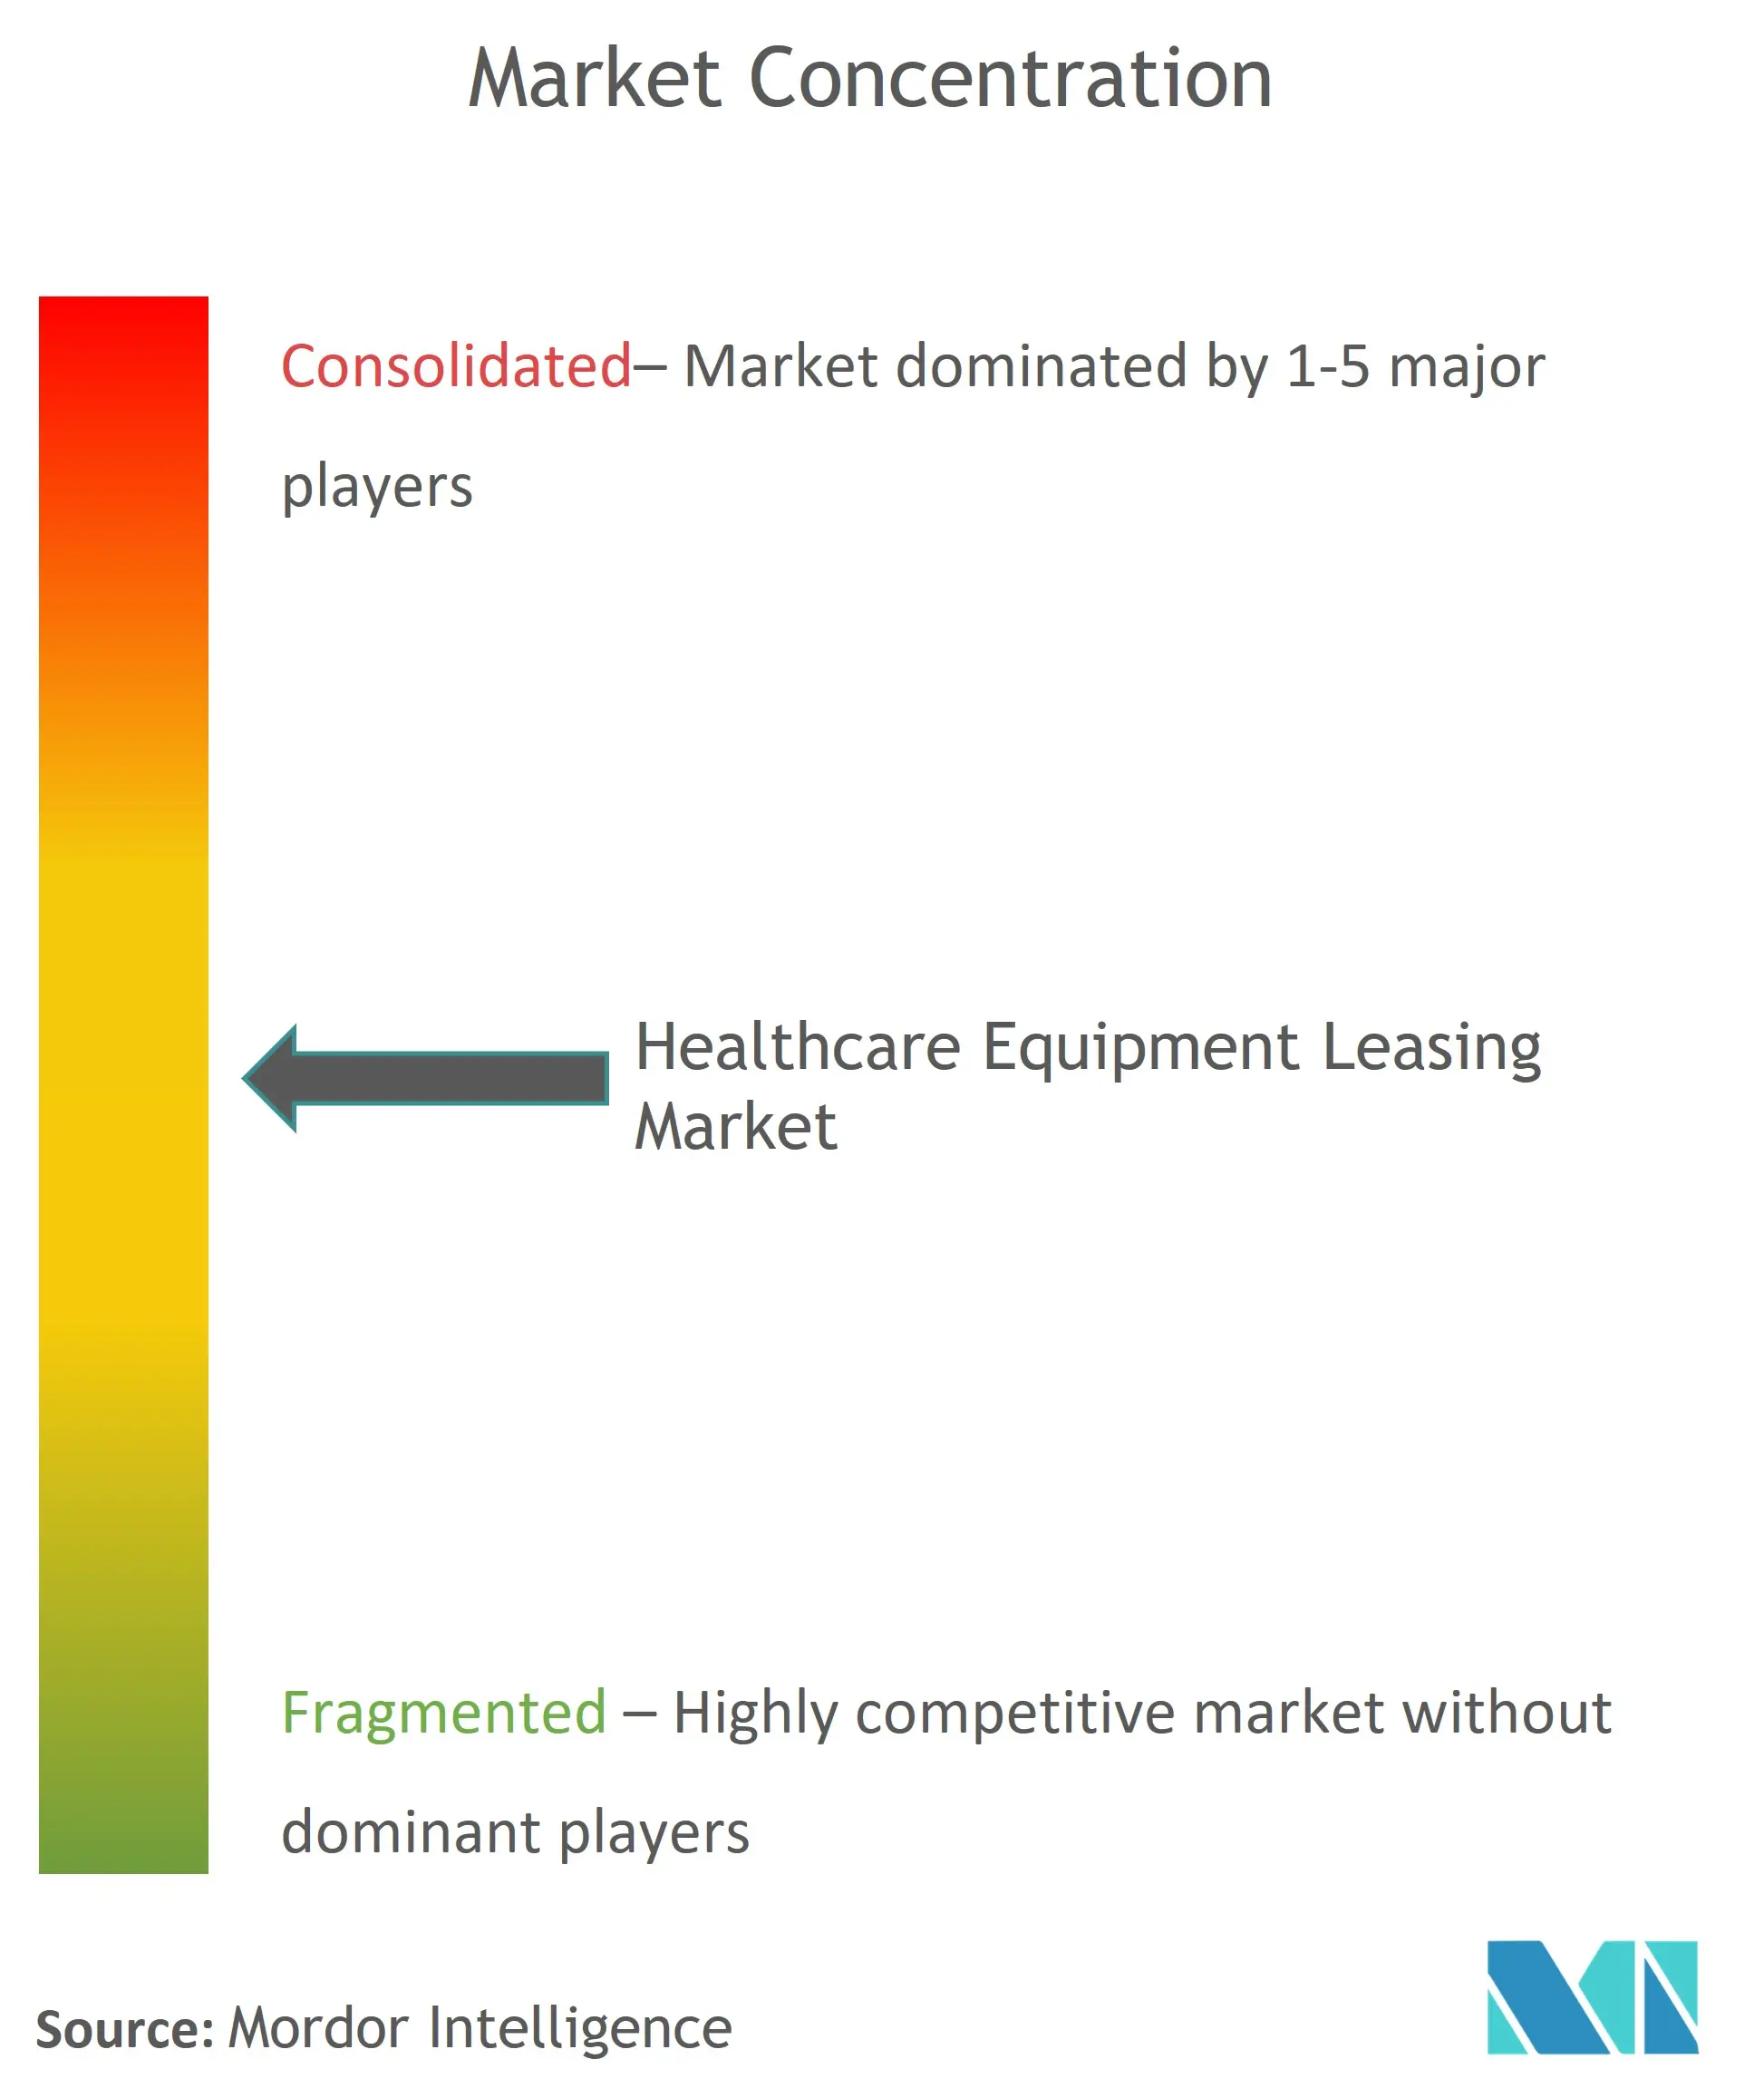 Healthcare Equipment Leasing Market Concentration